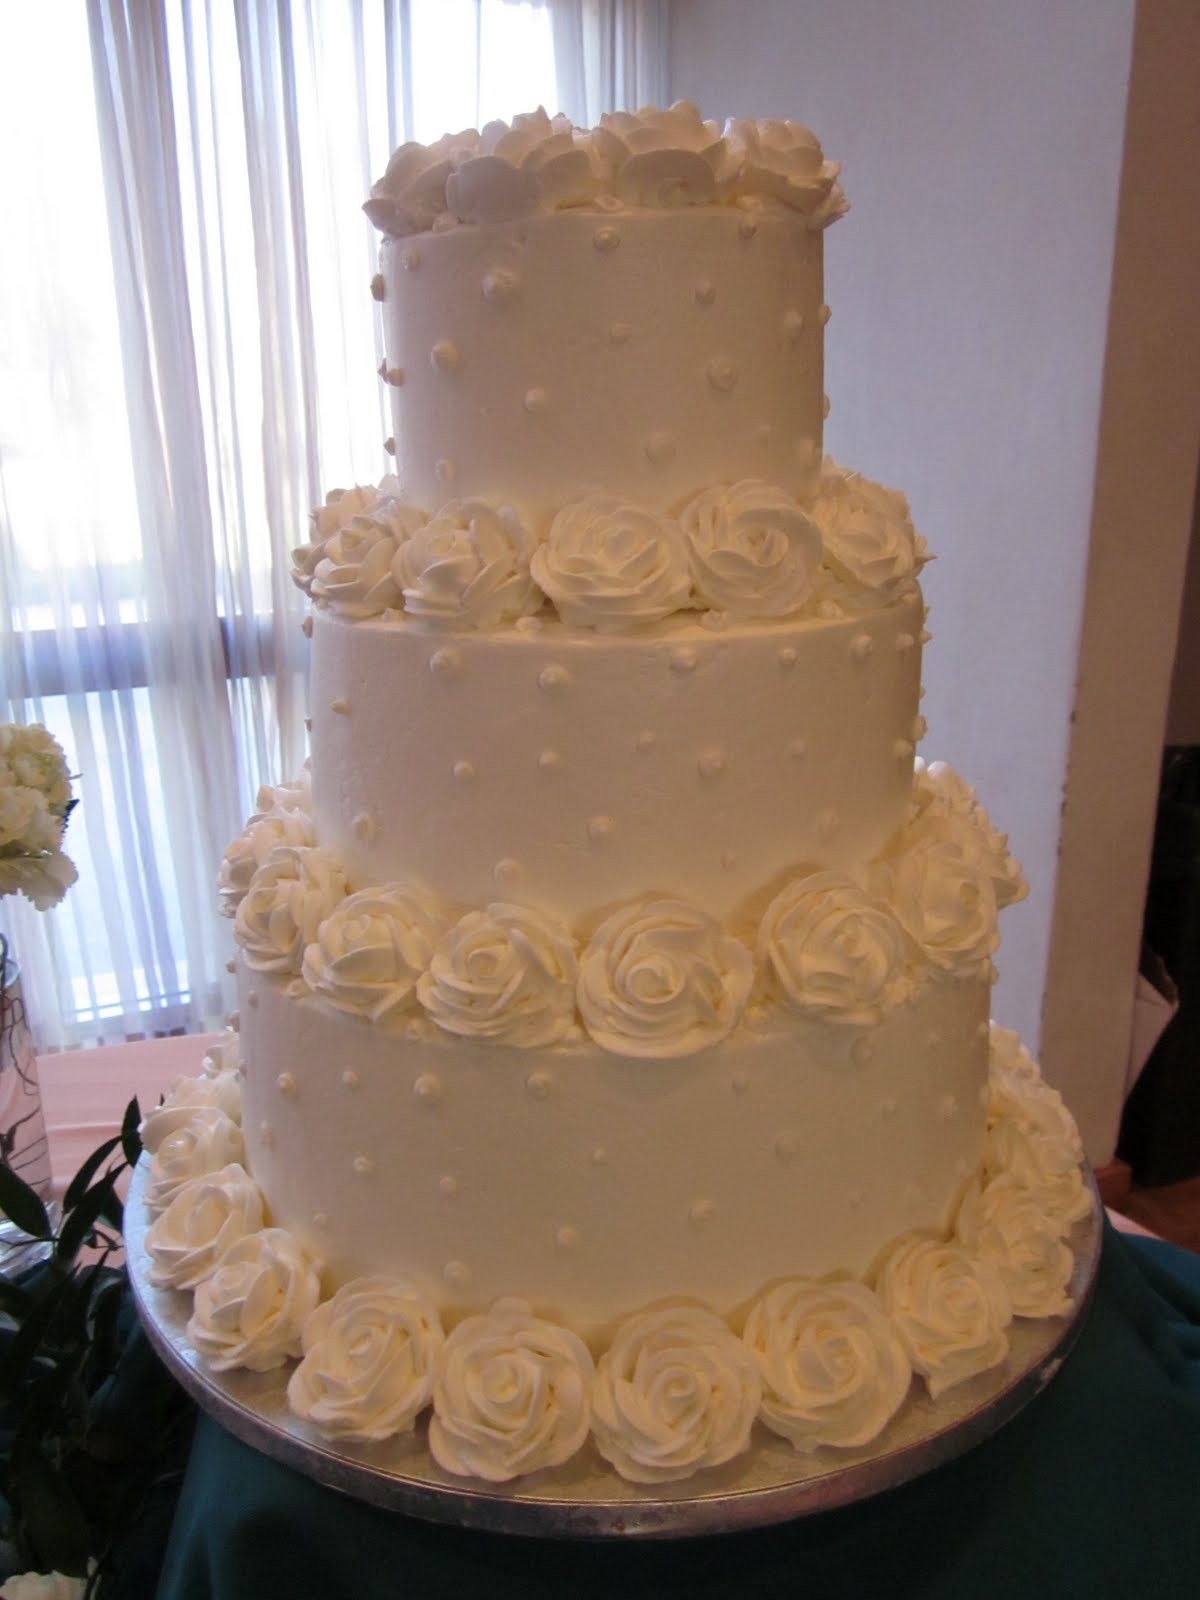 How Much Are Publix Wedding Cakes
 10 tips on how to choose your Publix wedding cakes idea